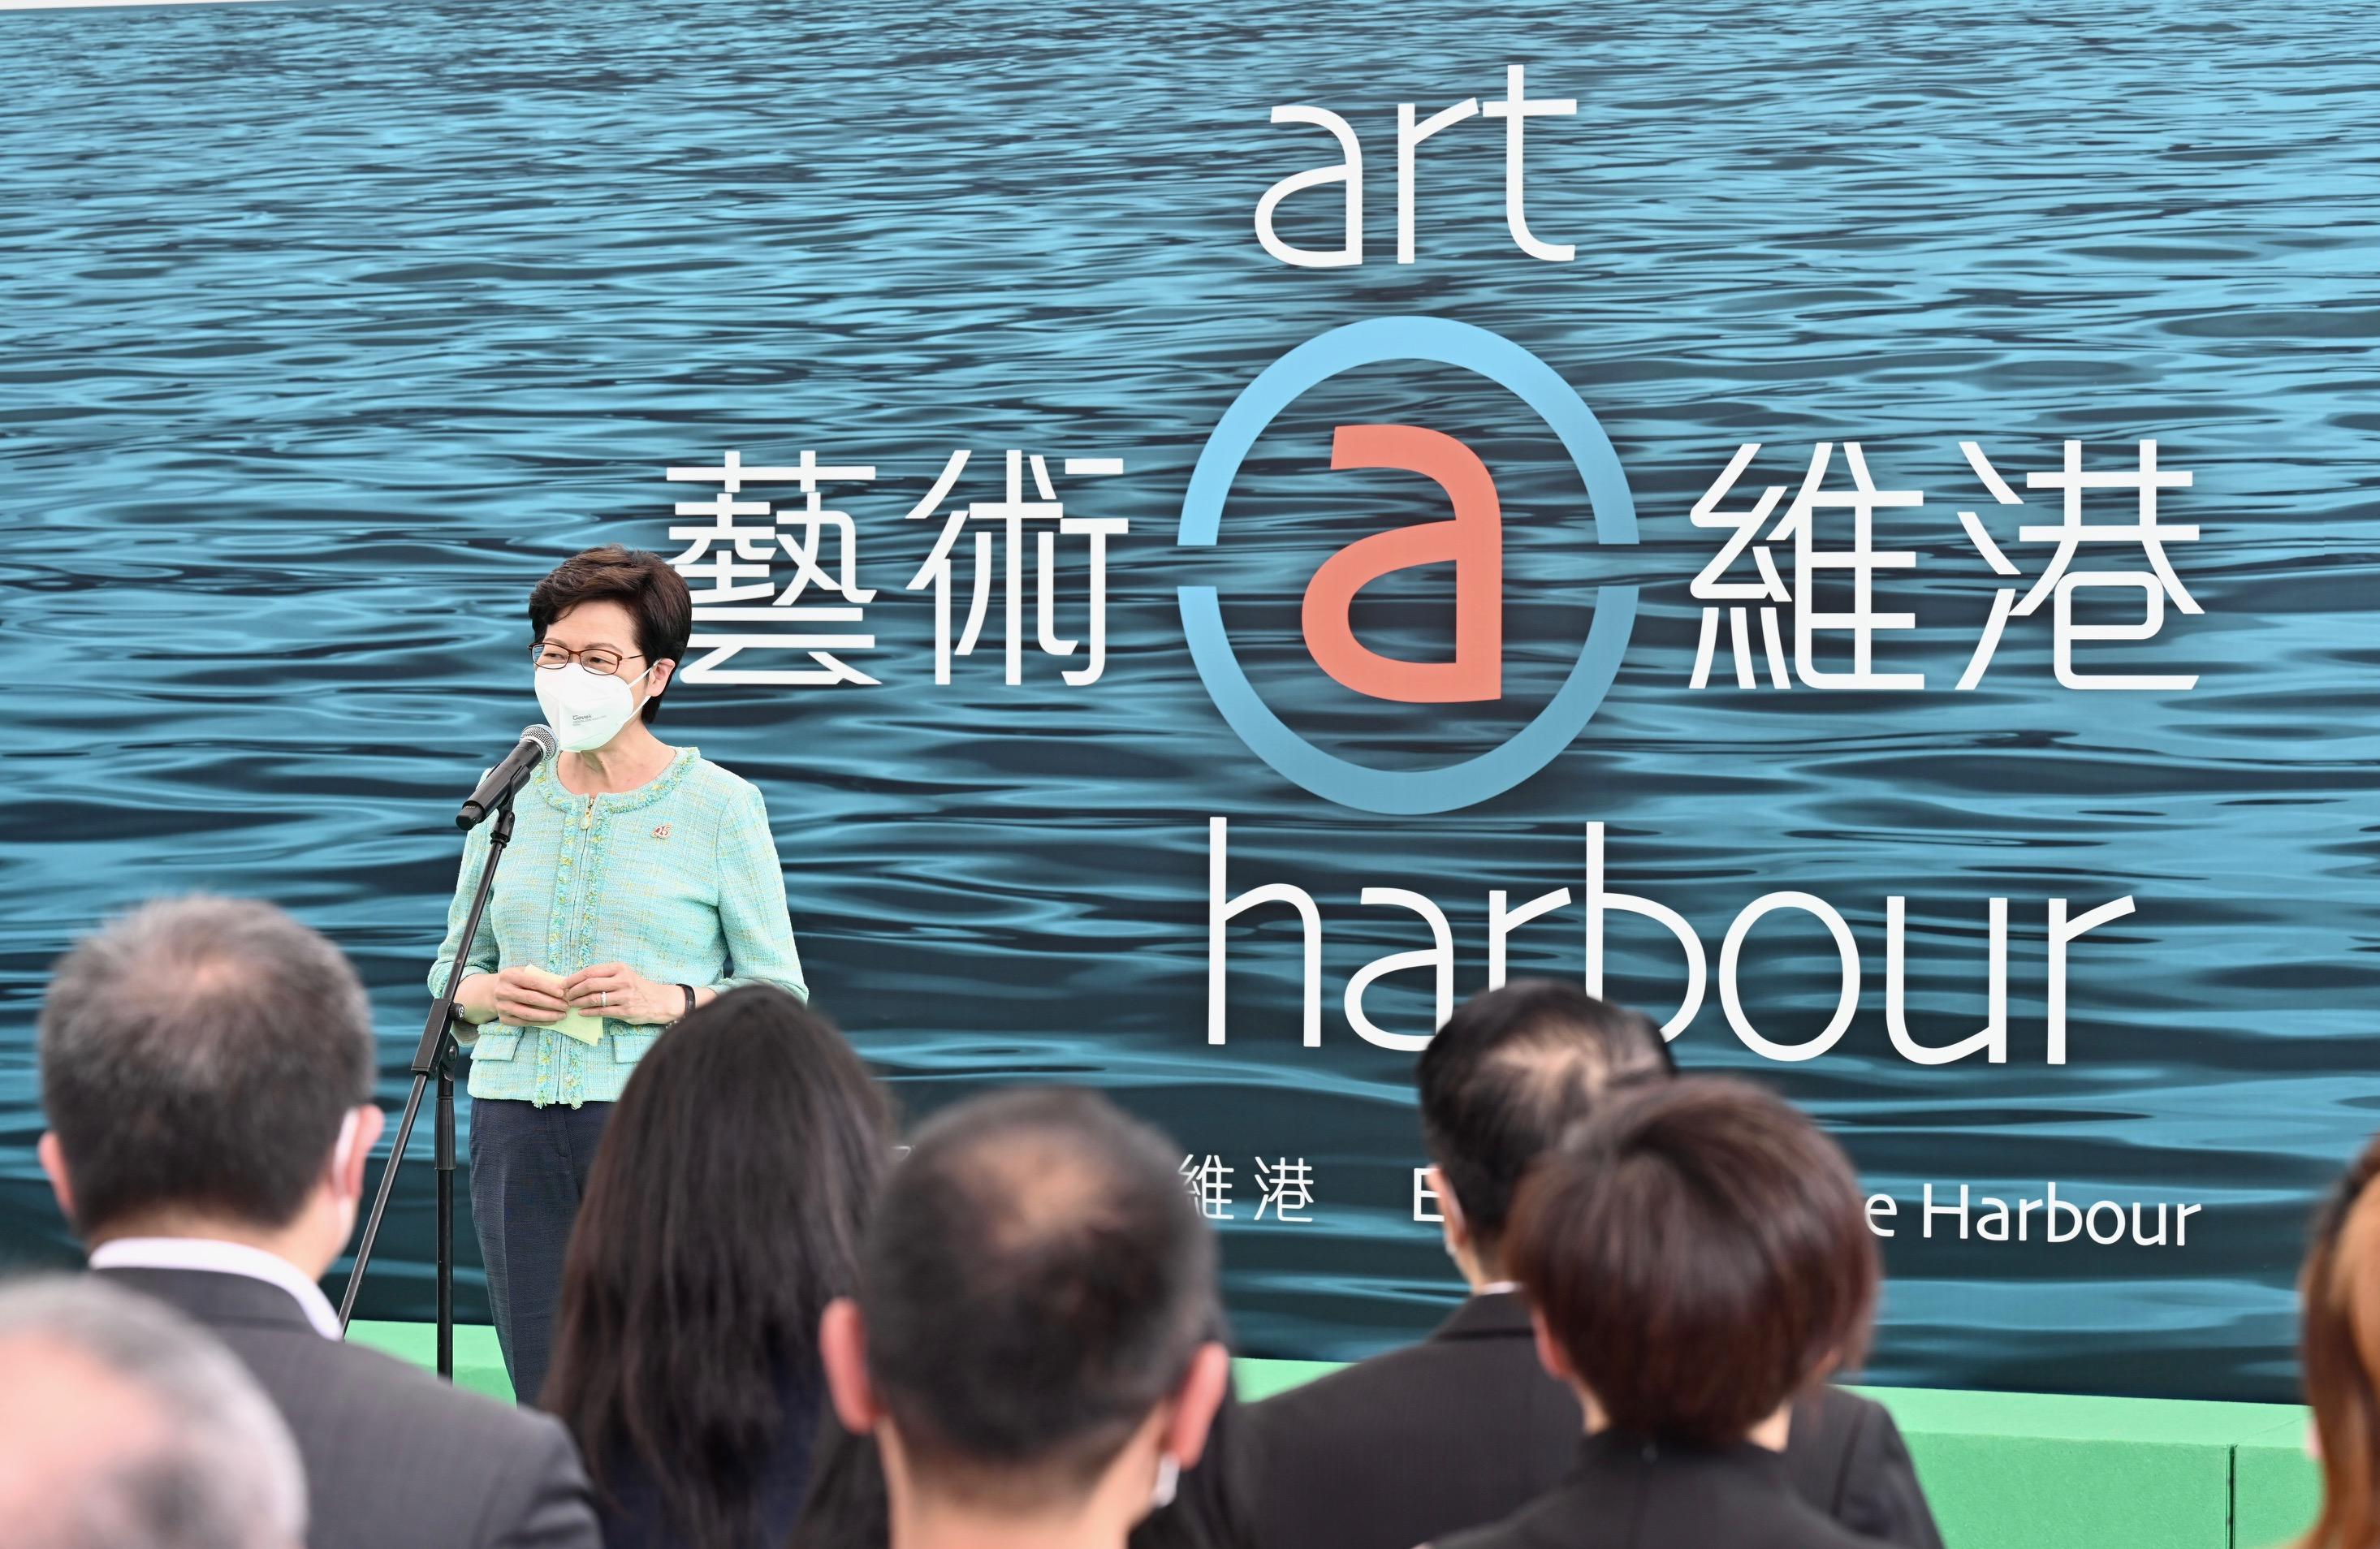 The opening ceremony of the exhibition "Art@Harbour" was held at the Central and Western District Promenade (Central Section) today (June 22). Picture shows the Chief Executive, Mrs Carrie Lam, addressing the ceremony.